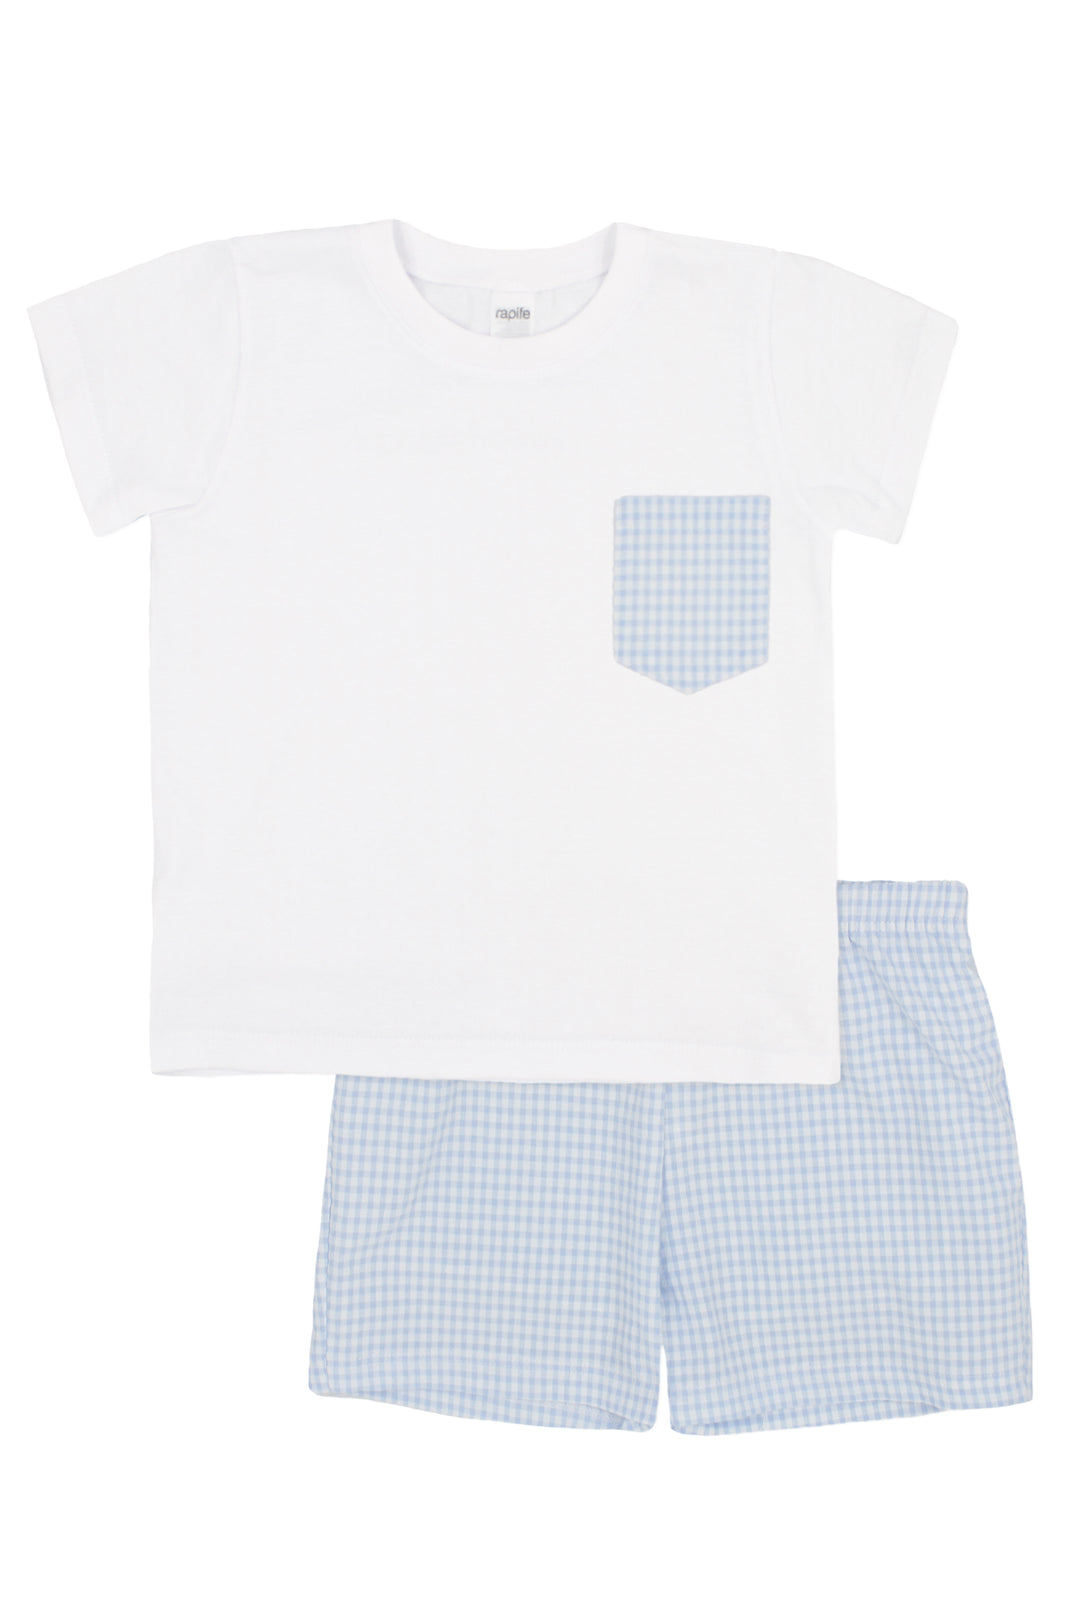 Rapife "Toby" Blue Gingham T-Shirt & Shorts | Millie and John